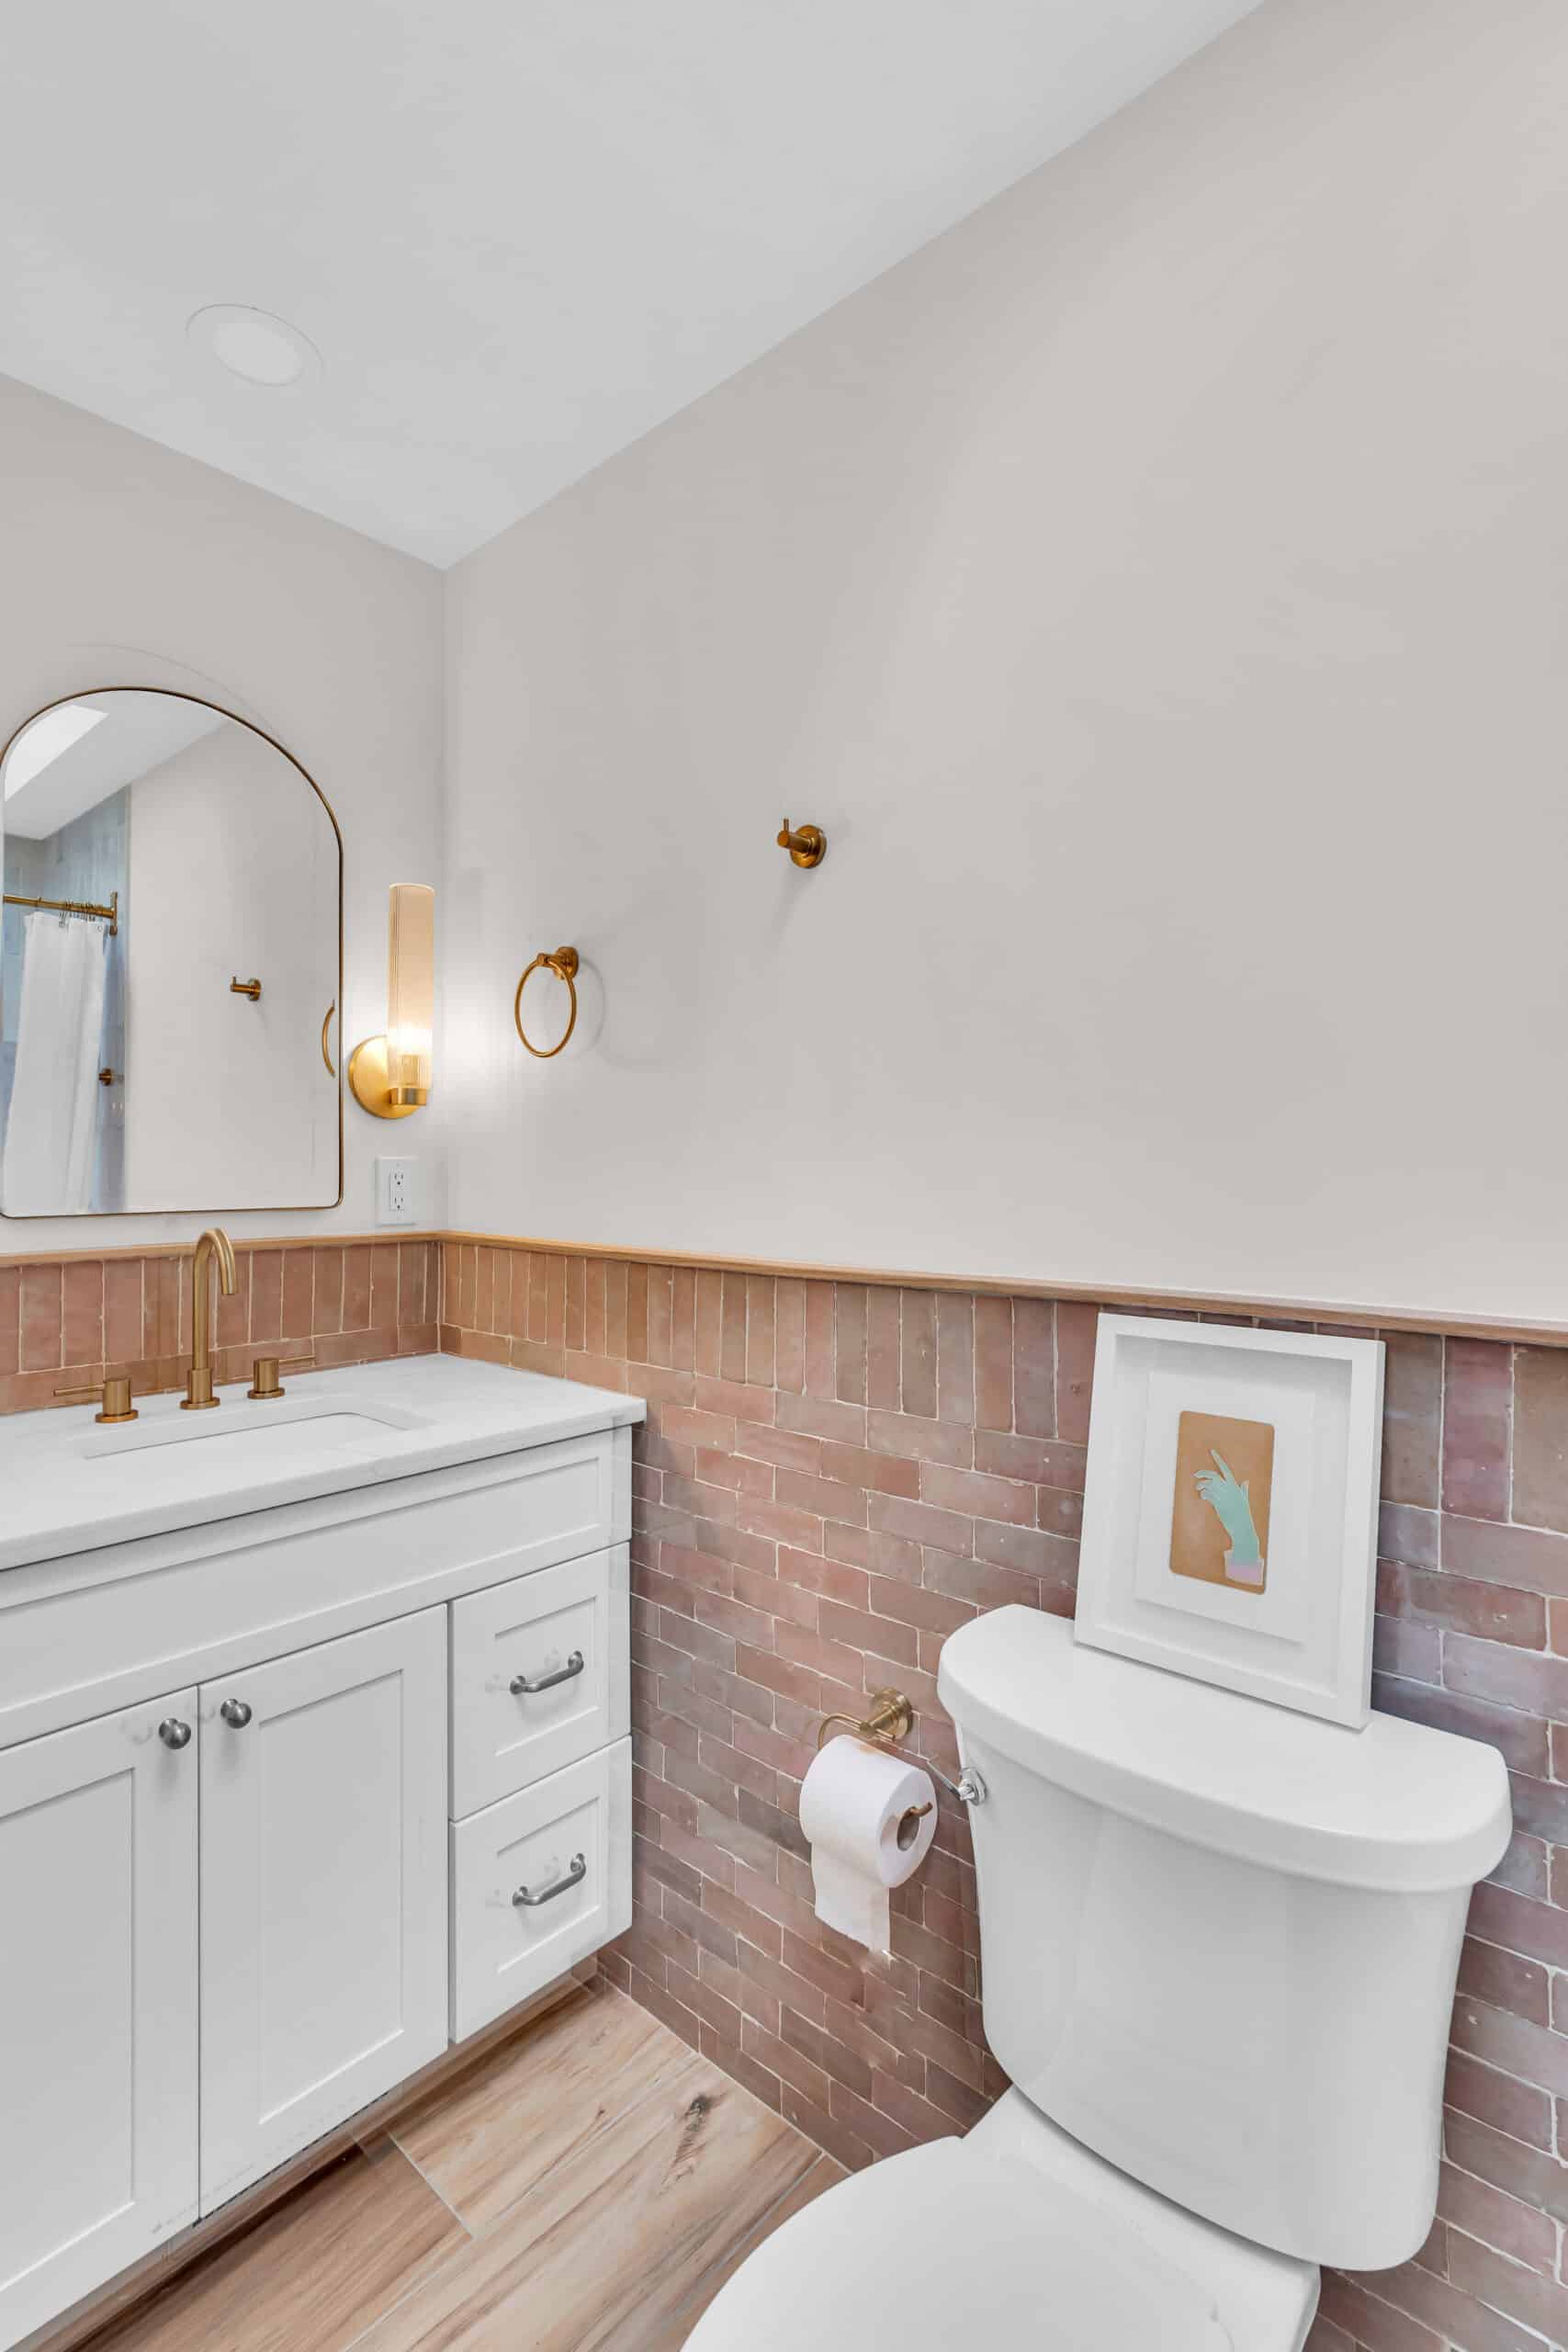 White bathroom vanity and toilet with brown tile surround